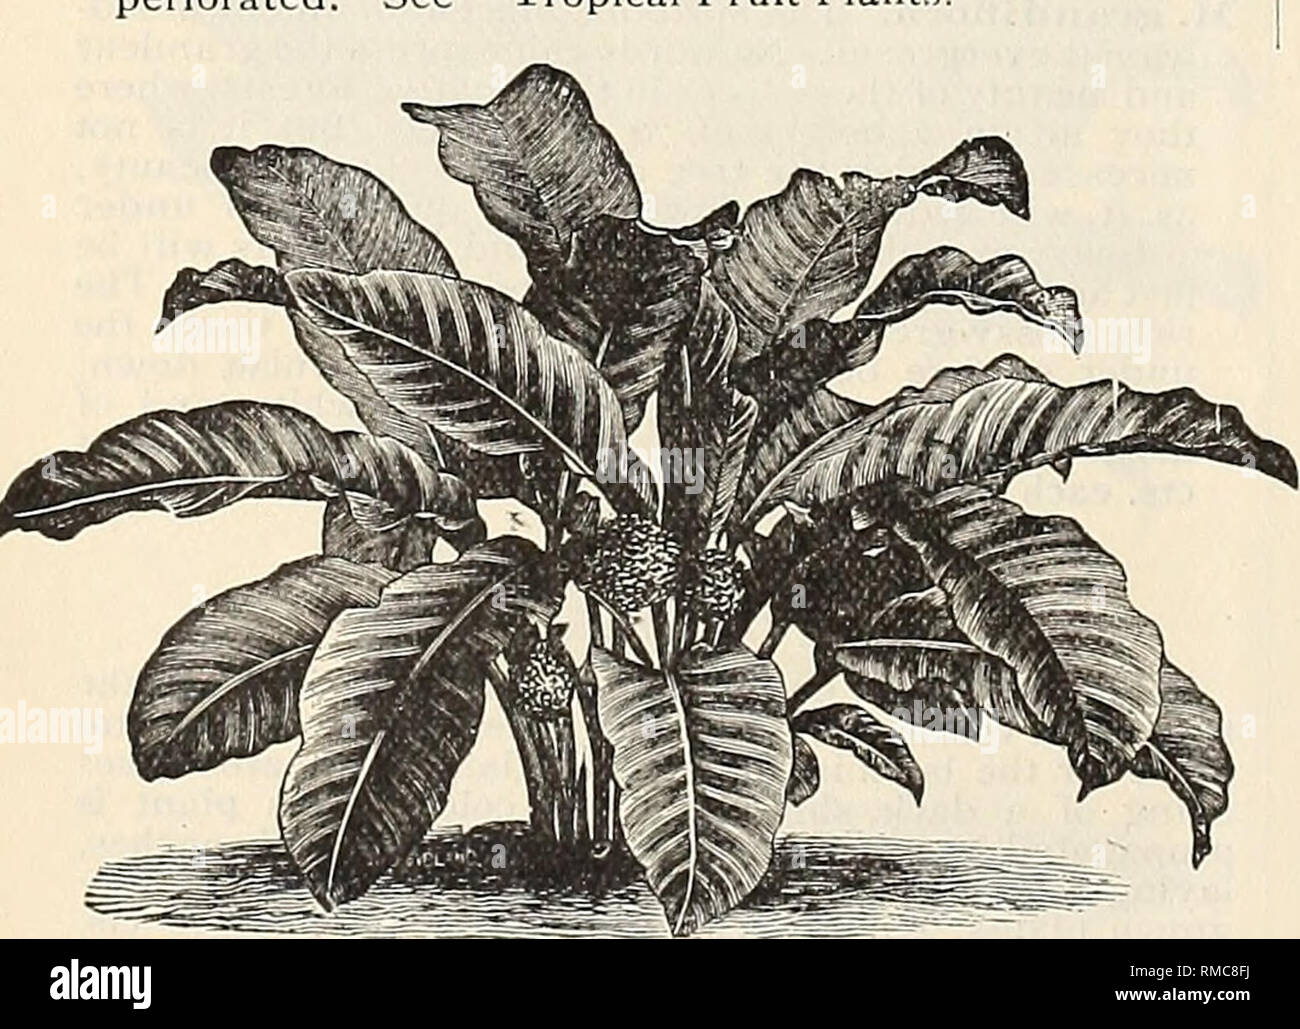 . Annual illustrated and descriptive catalogue of new, rare and beautiful plants and seeds. Nurseries (Horticulture) Florida Catalogs; Plants, Ornamental Catalogs; Flowers Catalogs; Tropical plants Catalogs; Fruit trees Seedlings Catalogs. 58 THE AMERICAN EXOTIC NURSERIES, SEVEN OAKS, FLORIDA. MARANTA ARUNDINACEA. (Bermuda Arrowroot.) The economic value of this plant is well known; it is also a rather handsome plant, and will not be out of place to grow among carinas and other foliage plants. 15 cts. each, Si.25 per dozen. We have several other species of Maranta, with ele- gantly variegated f Stock Photo